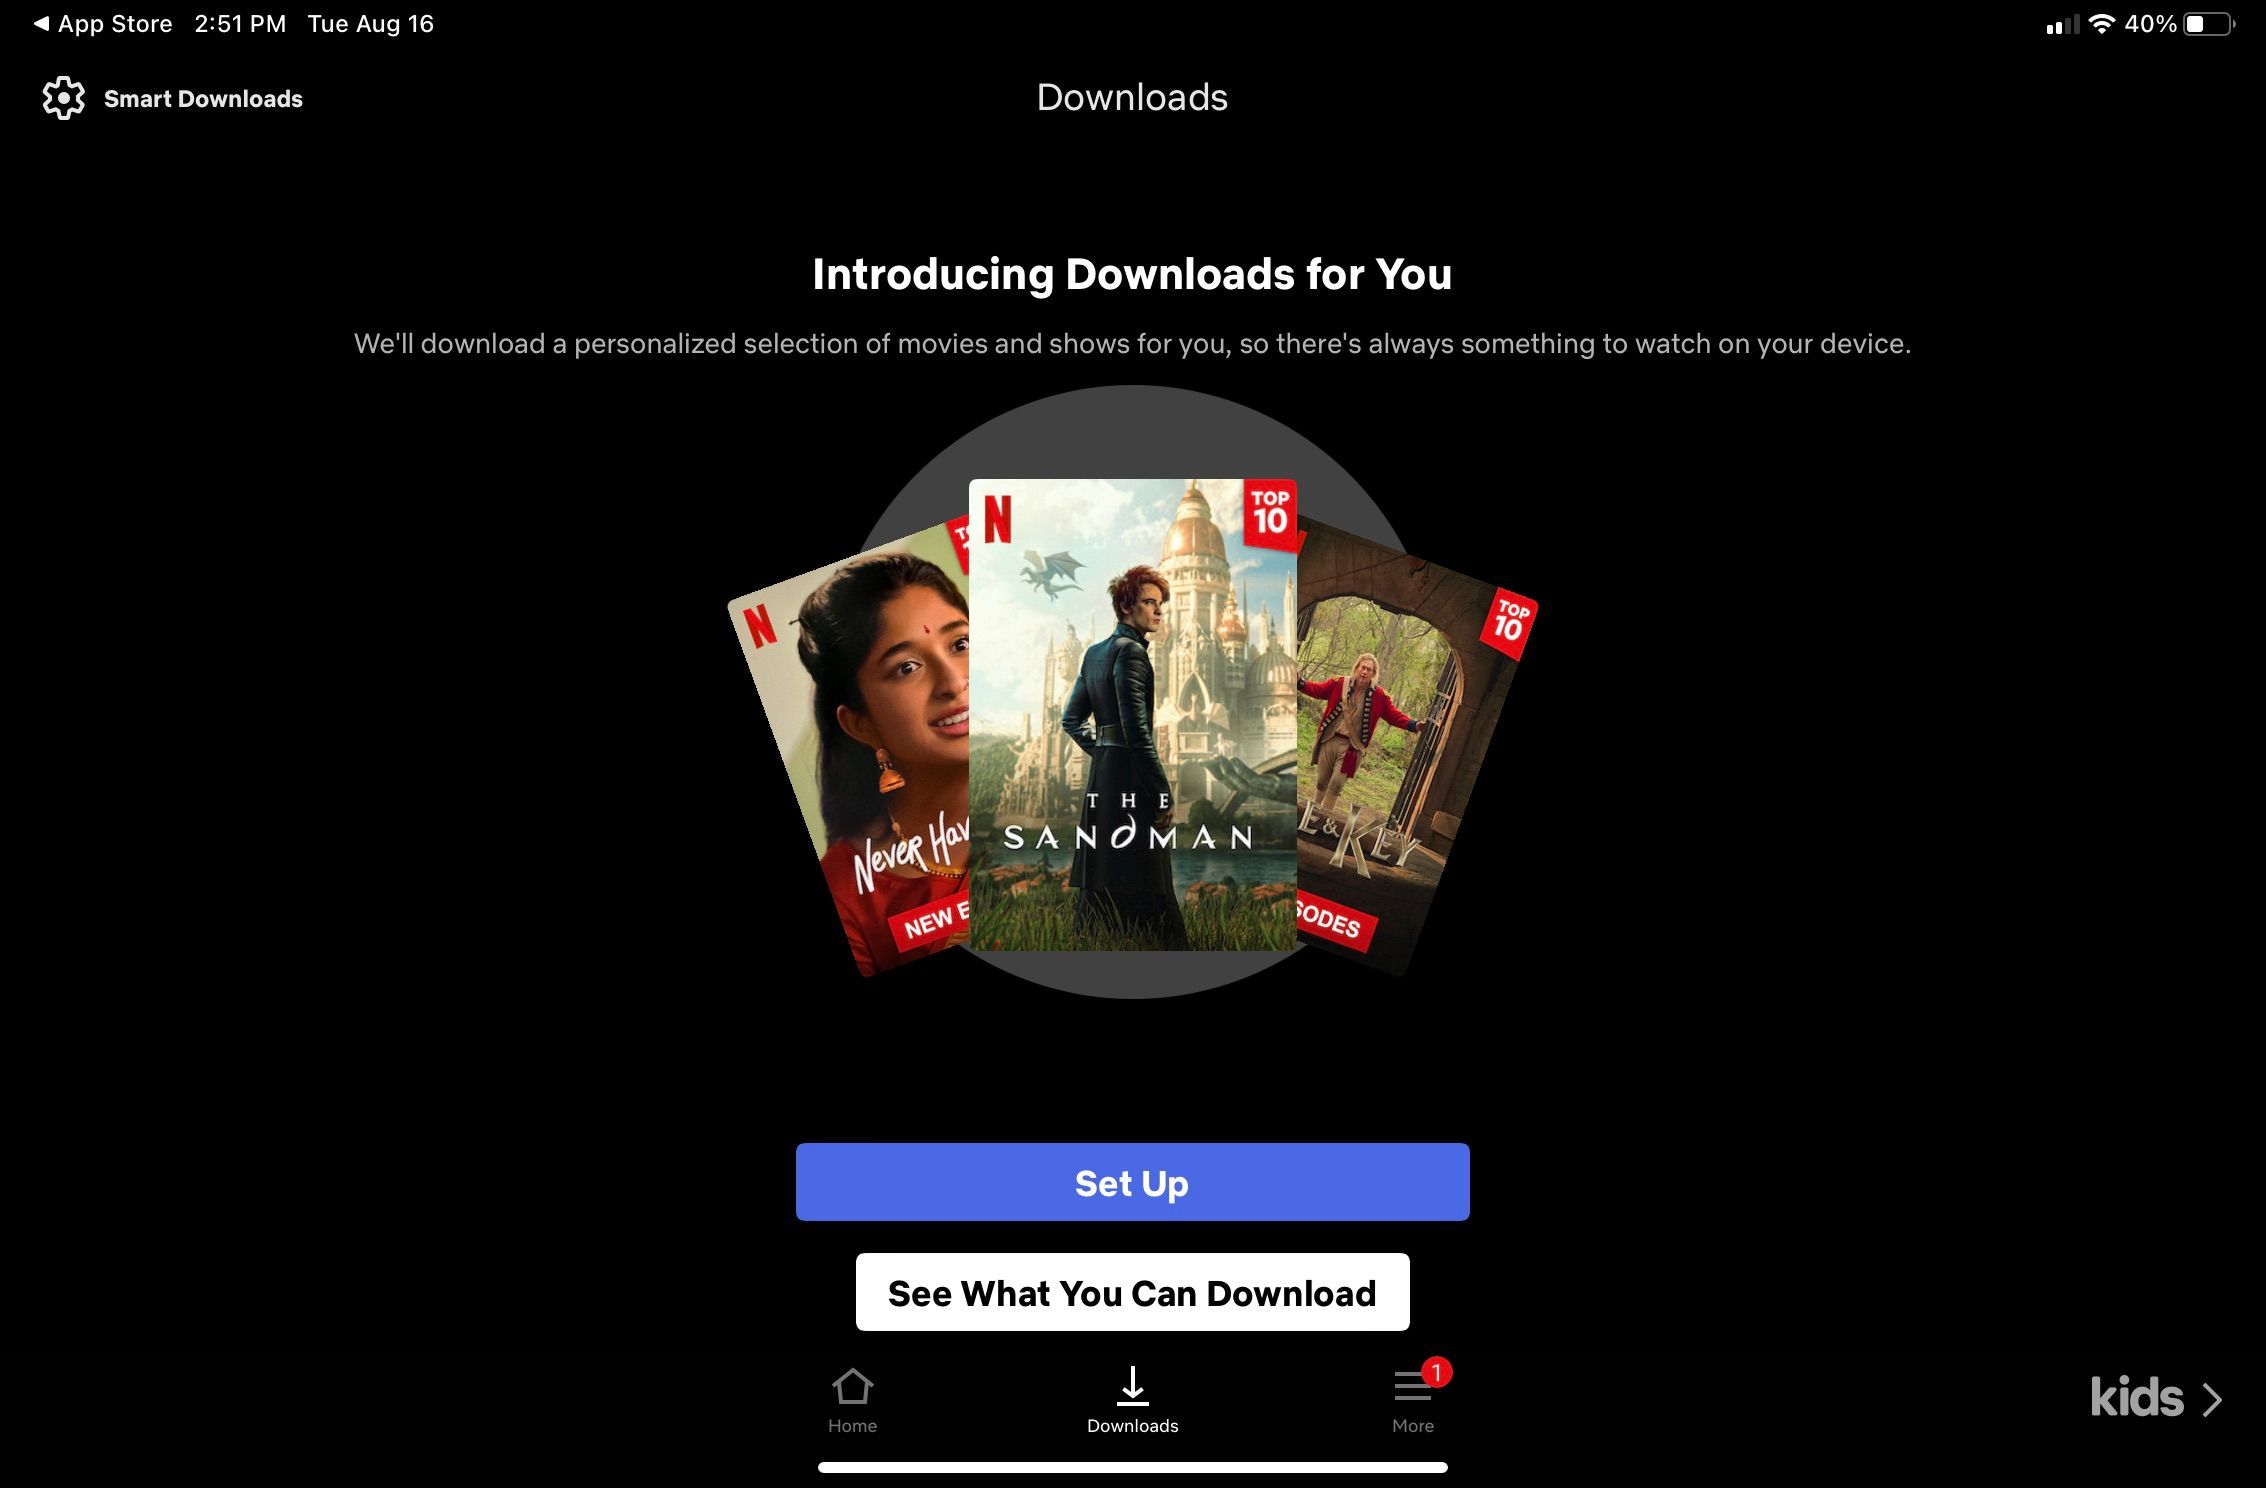 Netflix Downloads For You Page with Set Up button